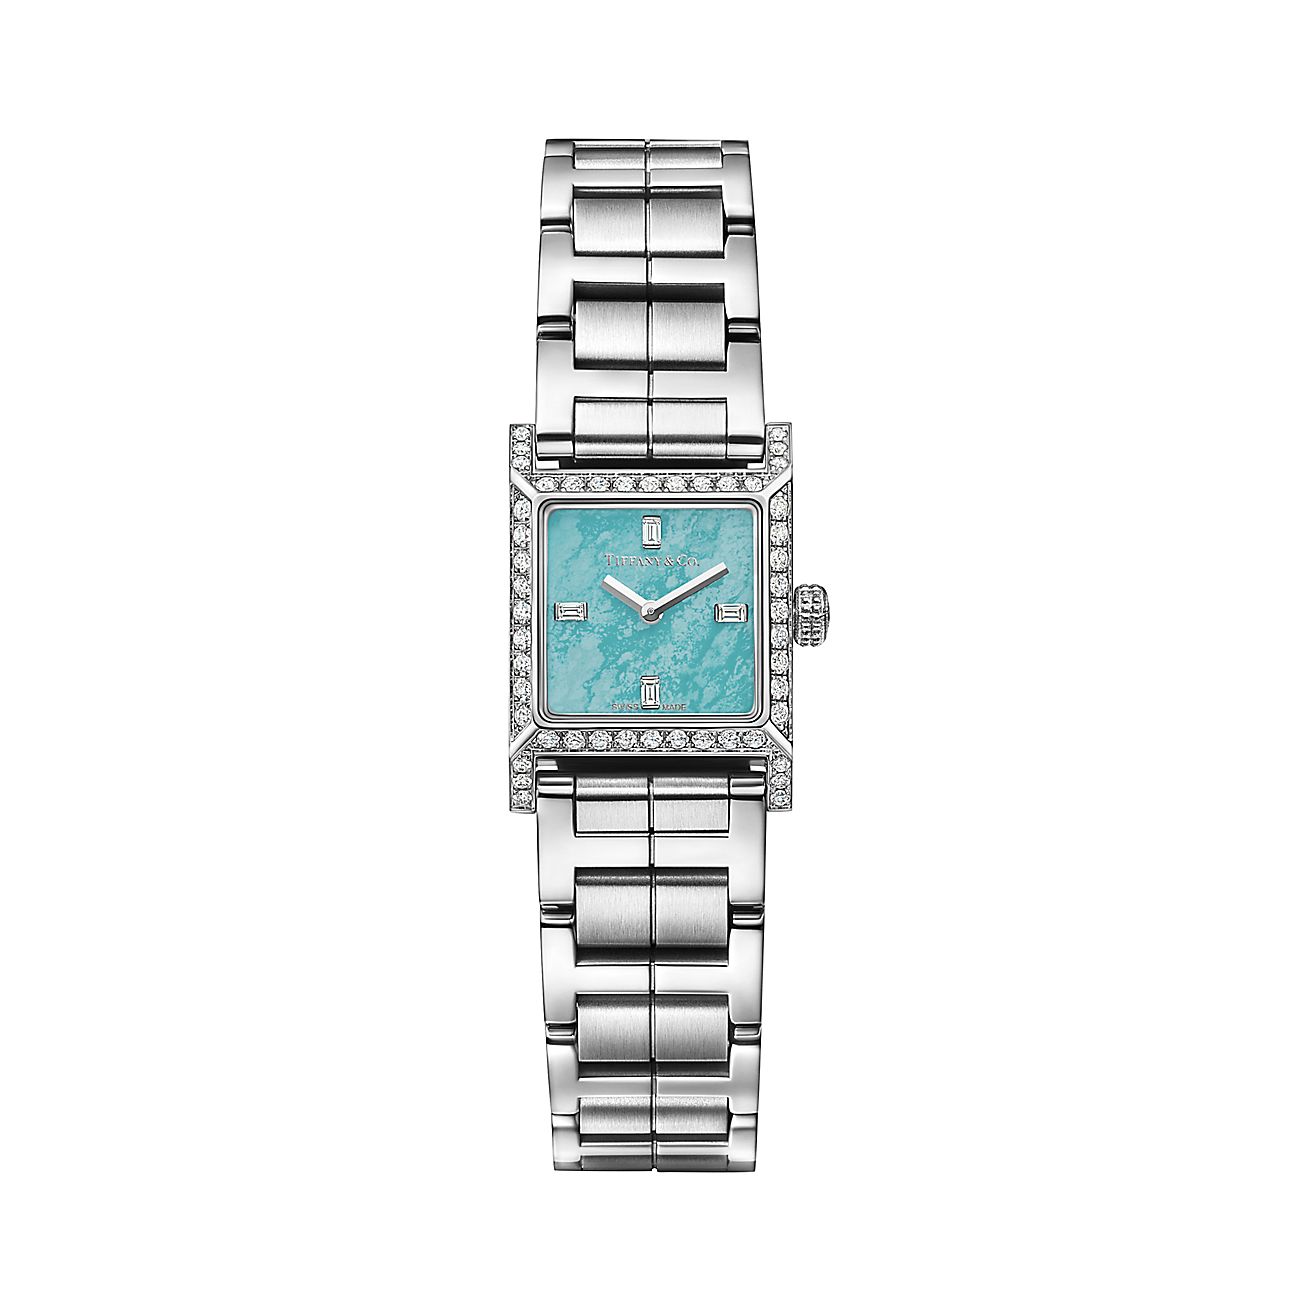 Tiffany 1837 Makers 16 mm Square Watch in Stainless Steel with a Turquoise  Dial | Tiffany &